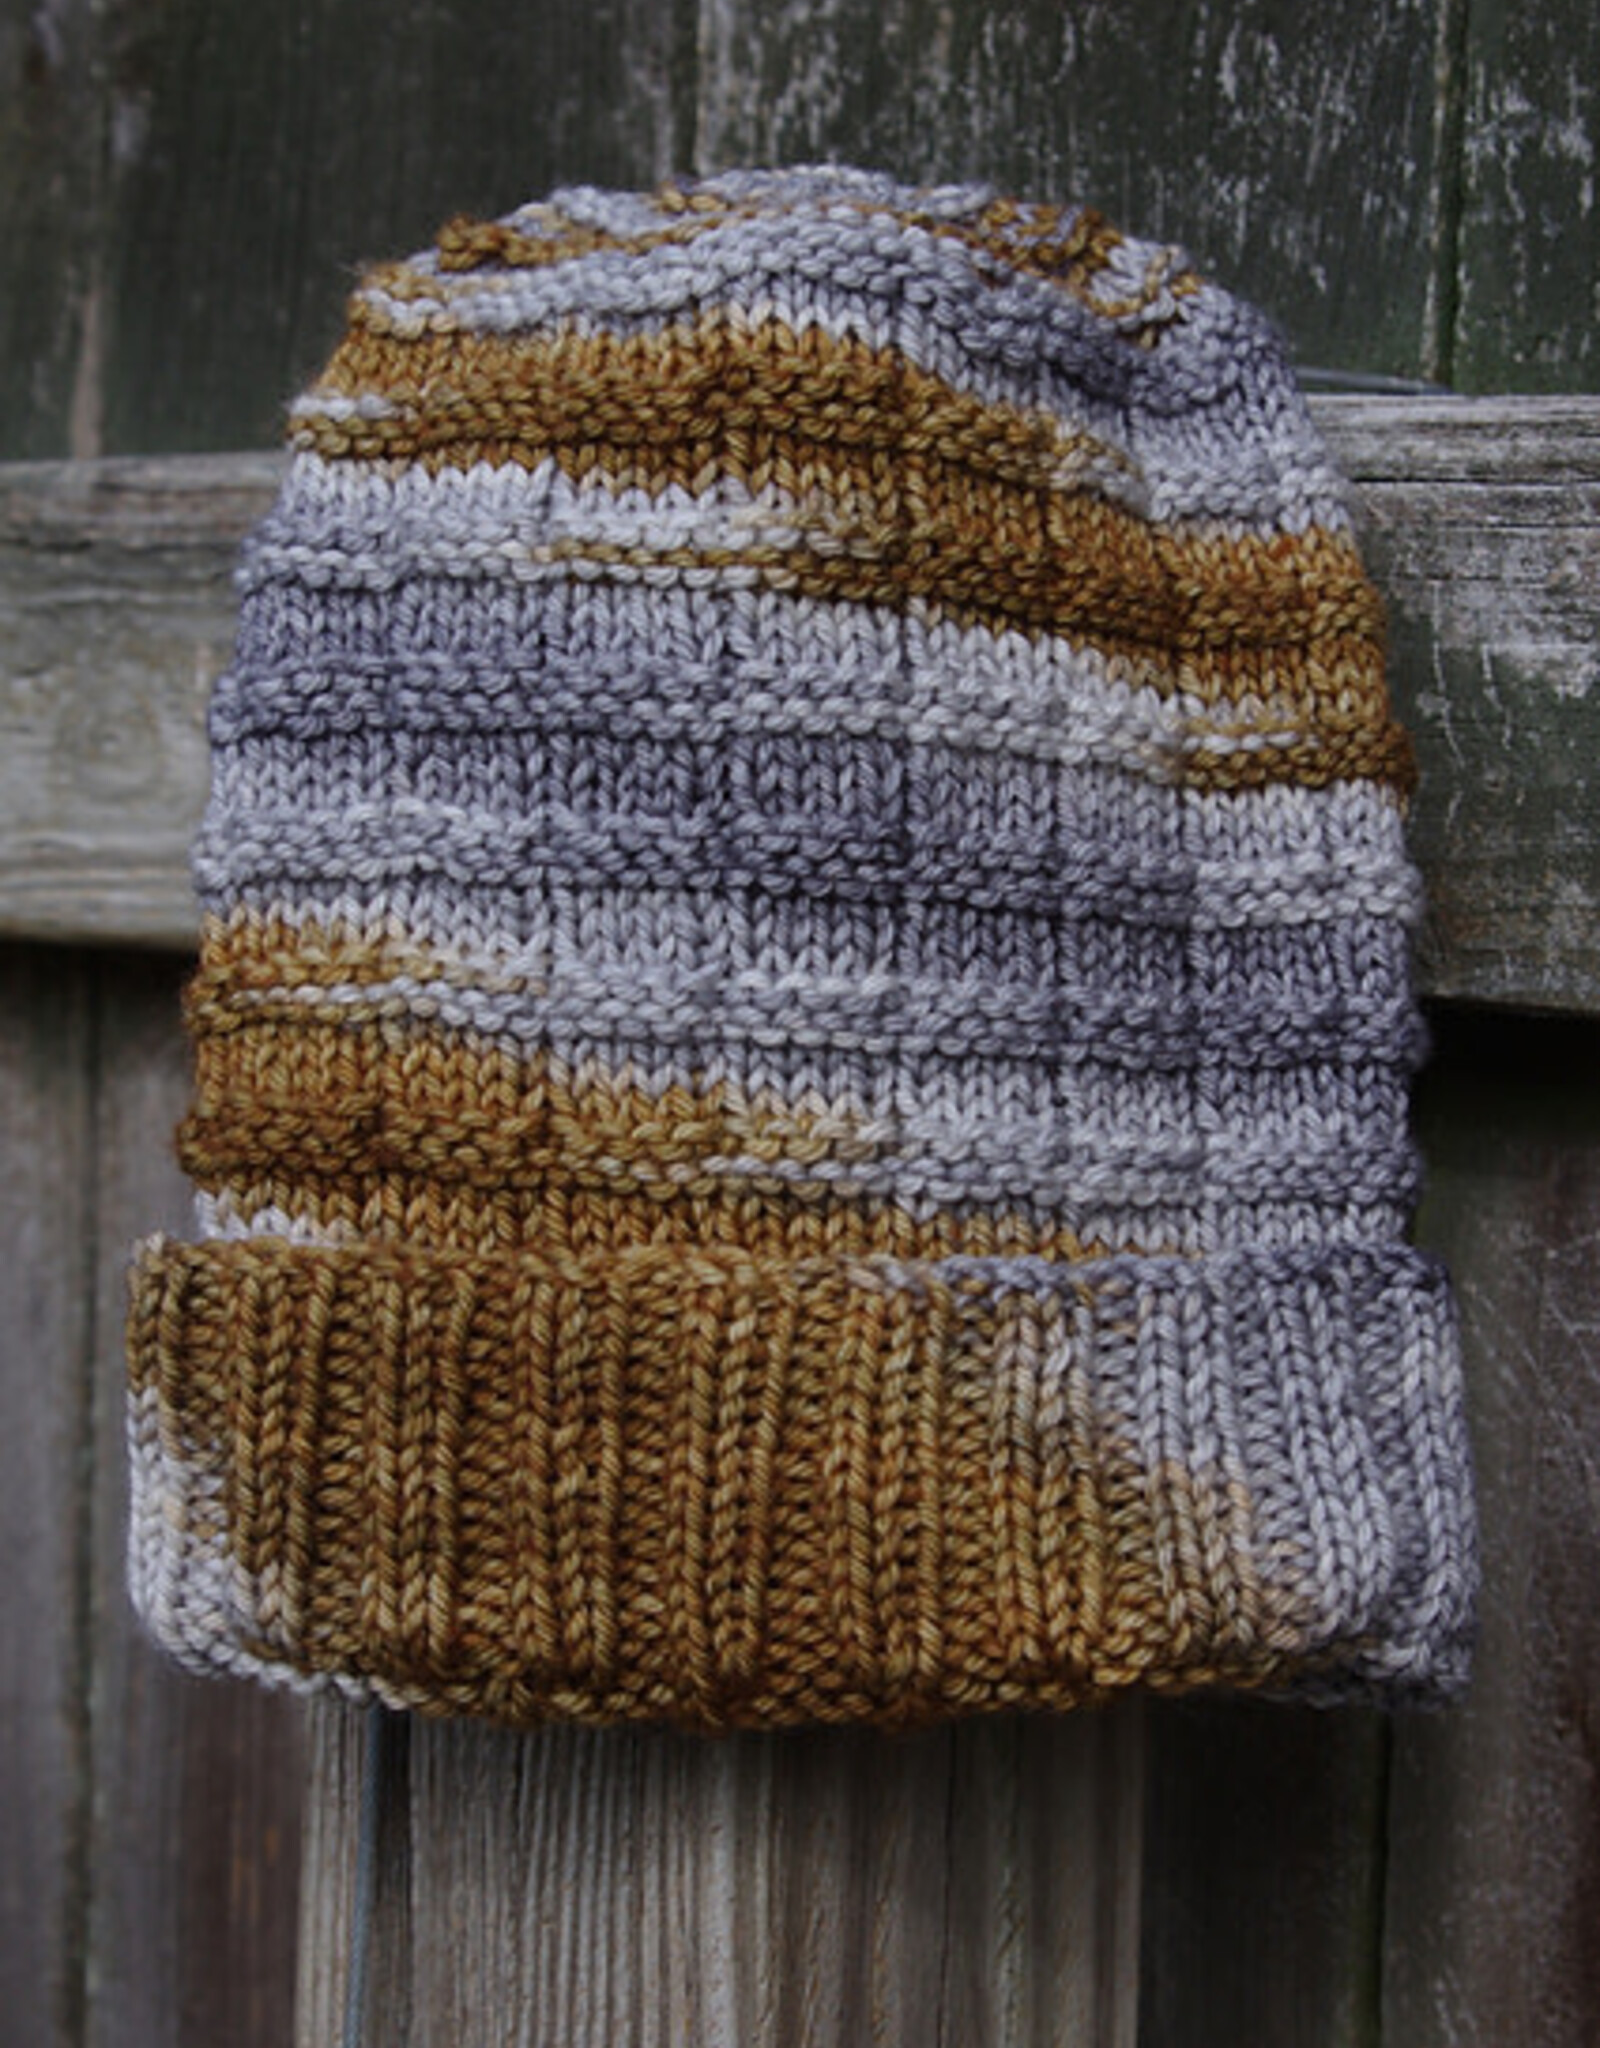 Knitting 103 – Basic Hat / Knit in the Round - Saturday, August 24, 1:30-3:30pm